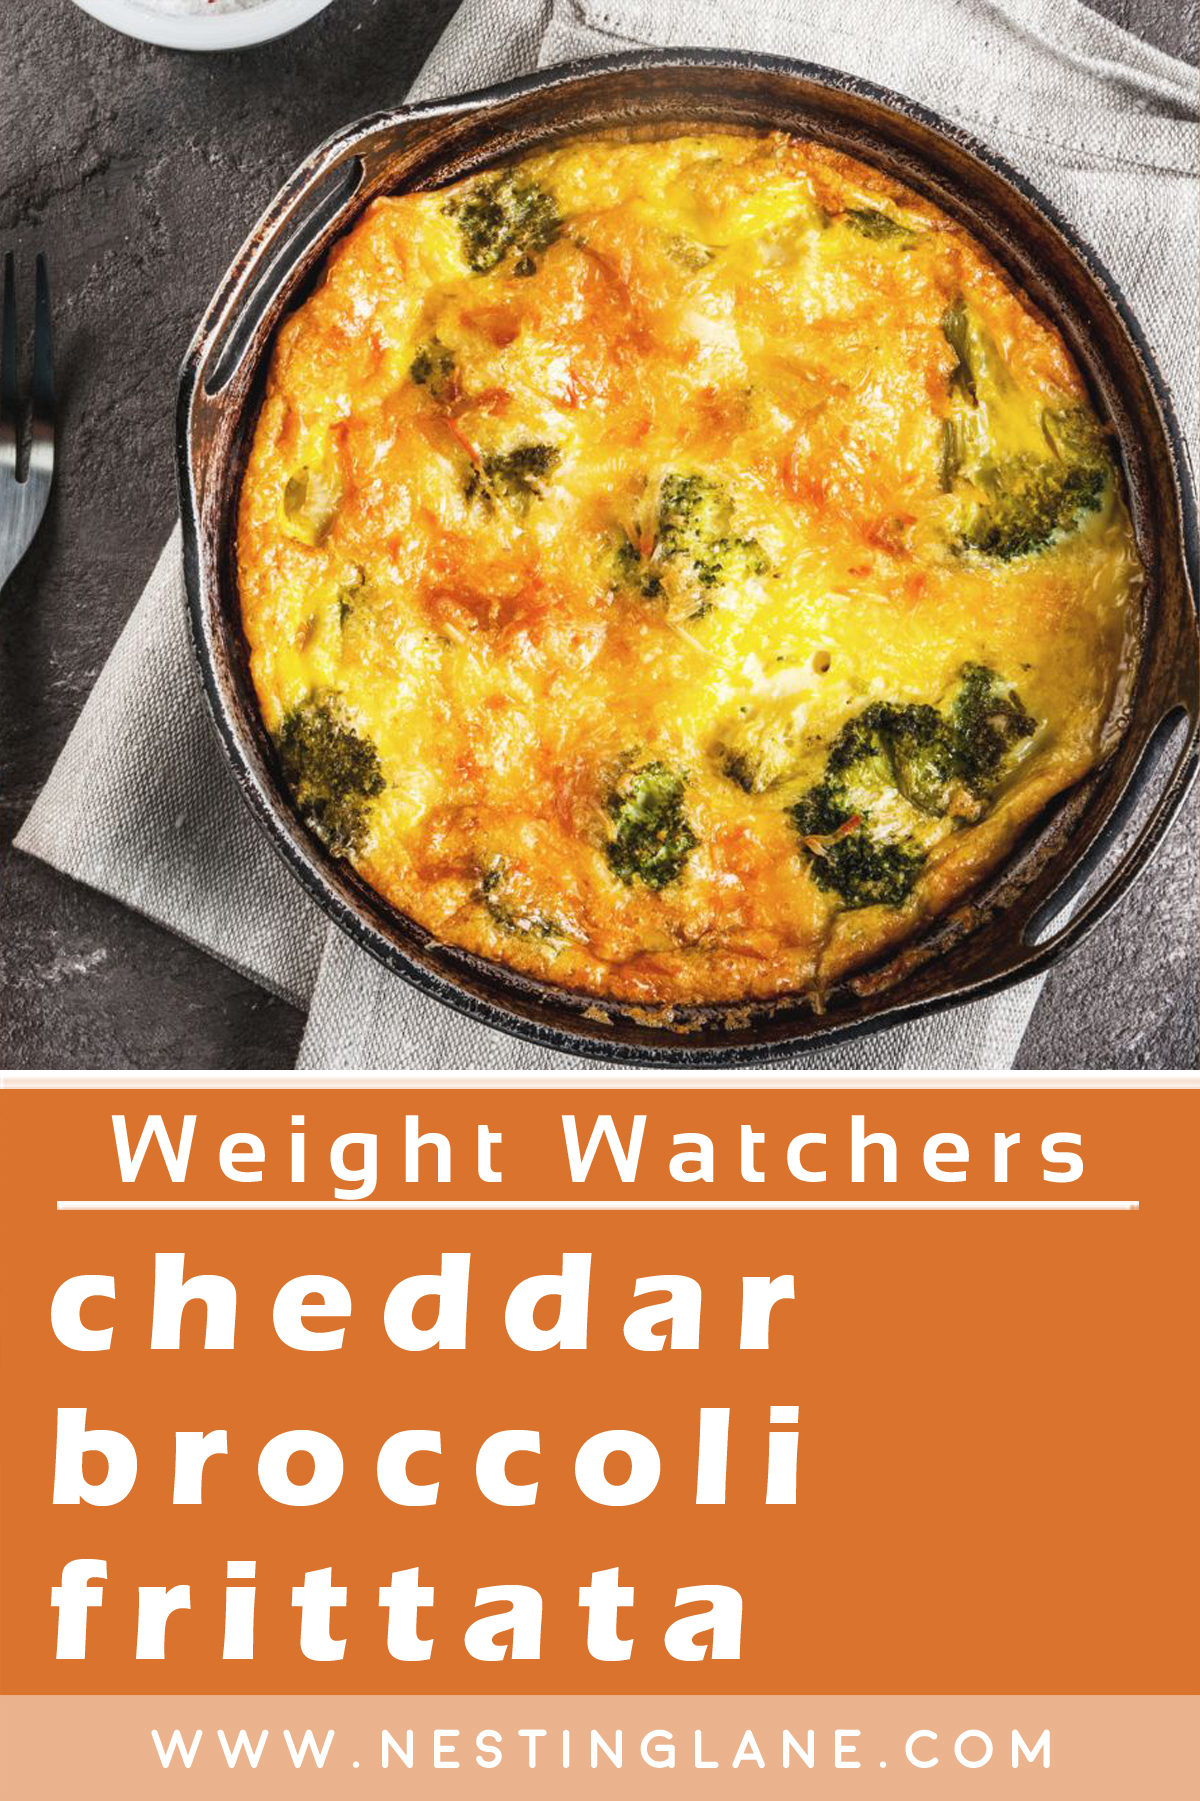 Graphic for Pinterest for Weight Watchers Cheesy Cheddar Broccoli Frittata Recipe.